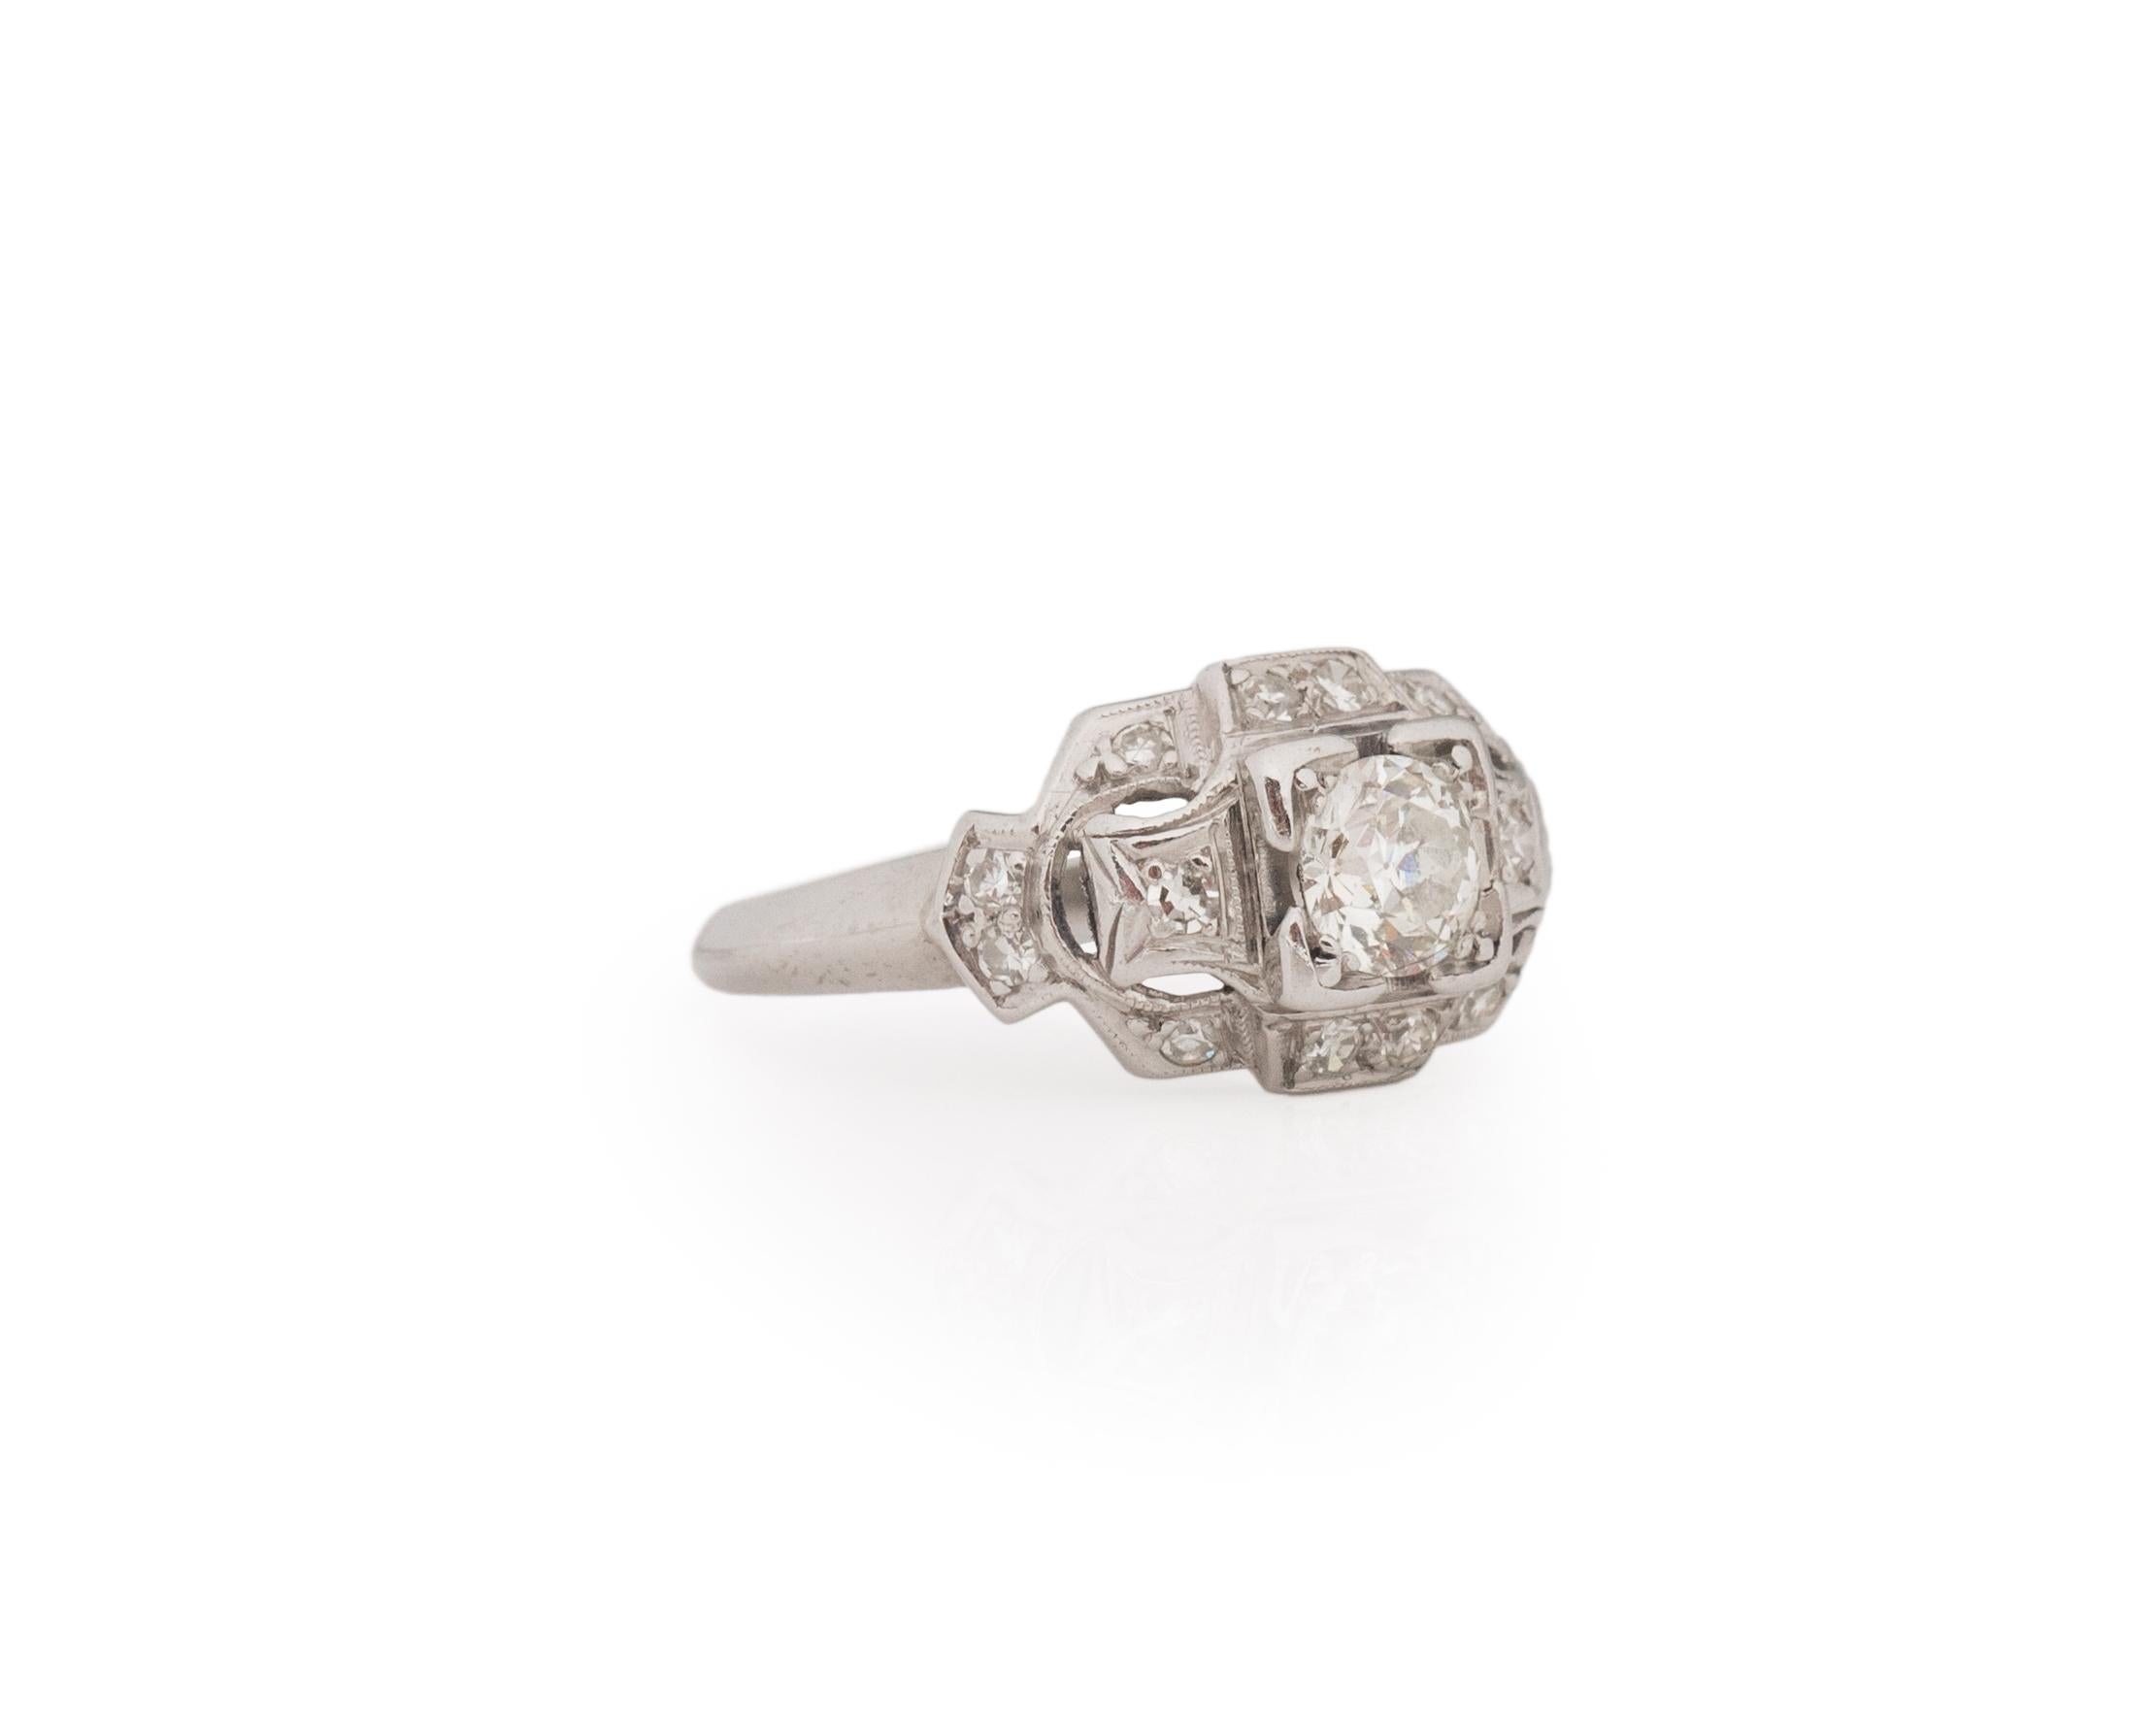 Ring Size: 4.25
Metal Type: Platinum [Hallmarked, and Tested]
Weight: 3.8 grams

Center Diamond Details:
Weight: .40ct
Cut: Old European brilliant
Color: I
Clarity: VS

Finger to Top of Stone Measurement: 5mm
Condition: Excellent